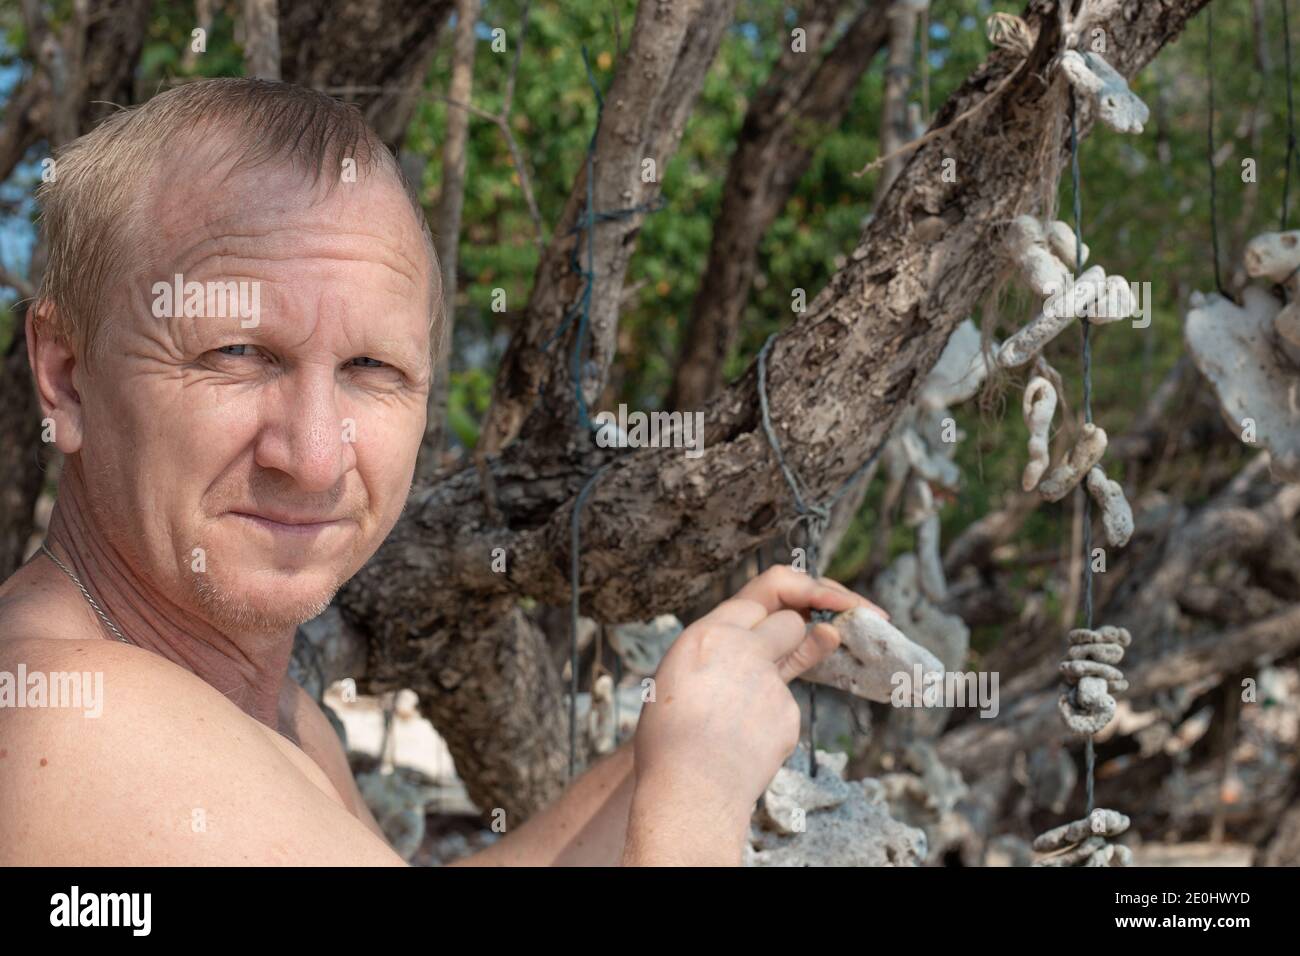 adult Caucasian man close-up on a tropical island tying corals to a tree. Make a wish. Holidays in Asia Stock Photo